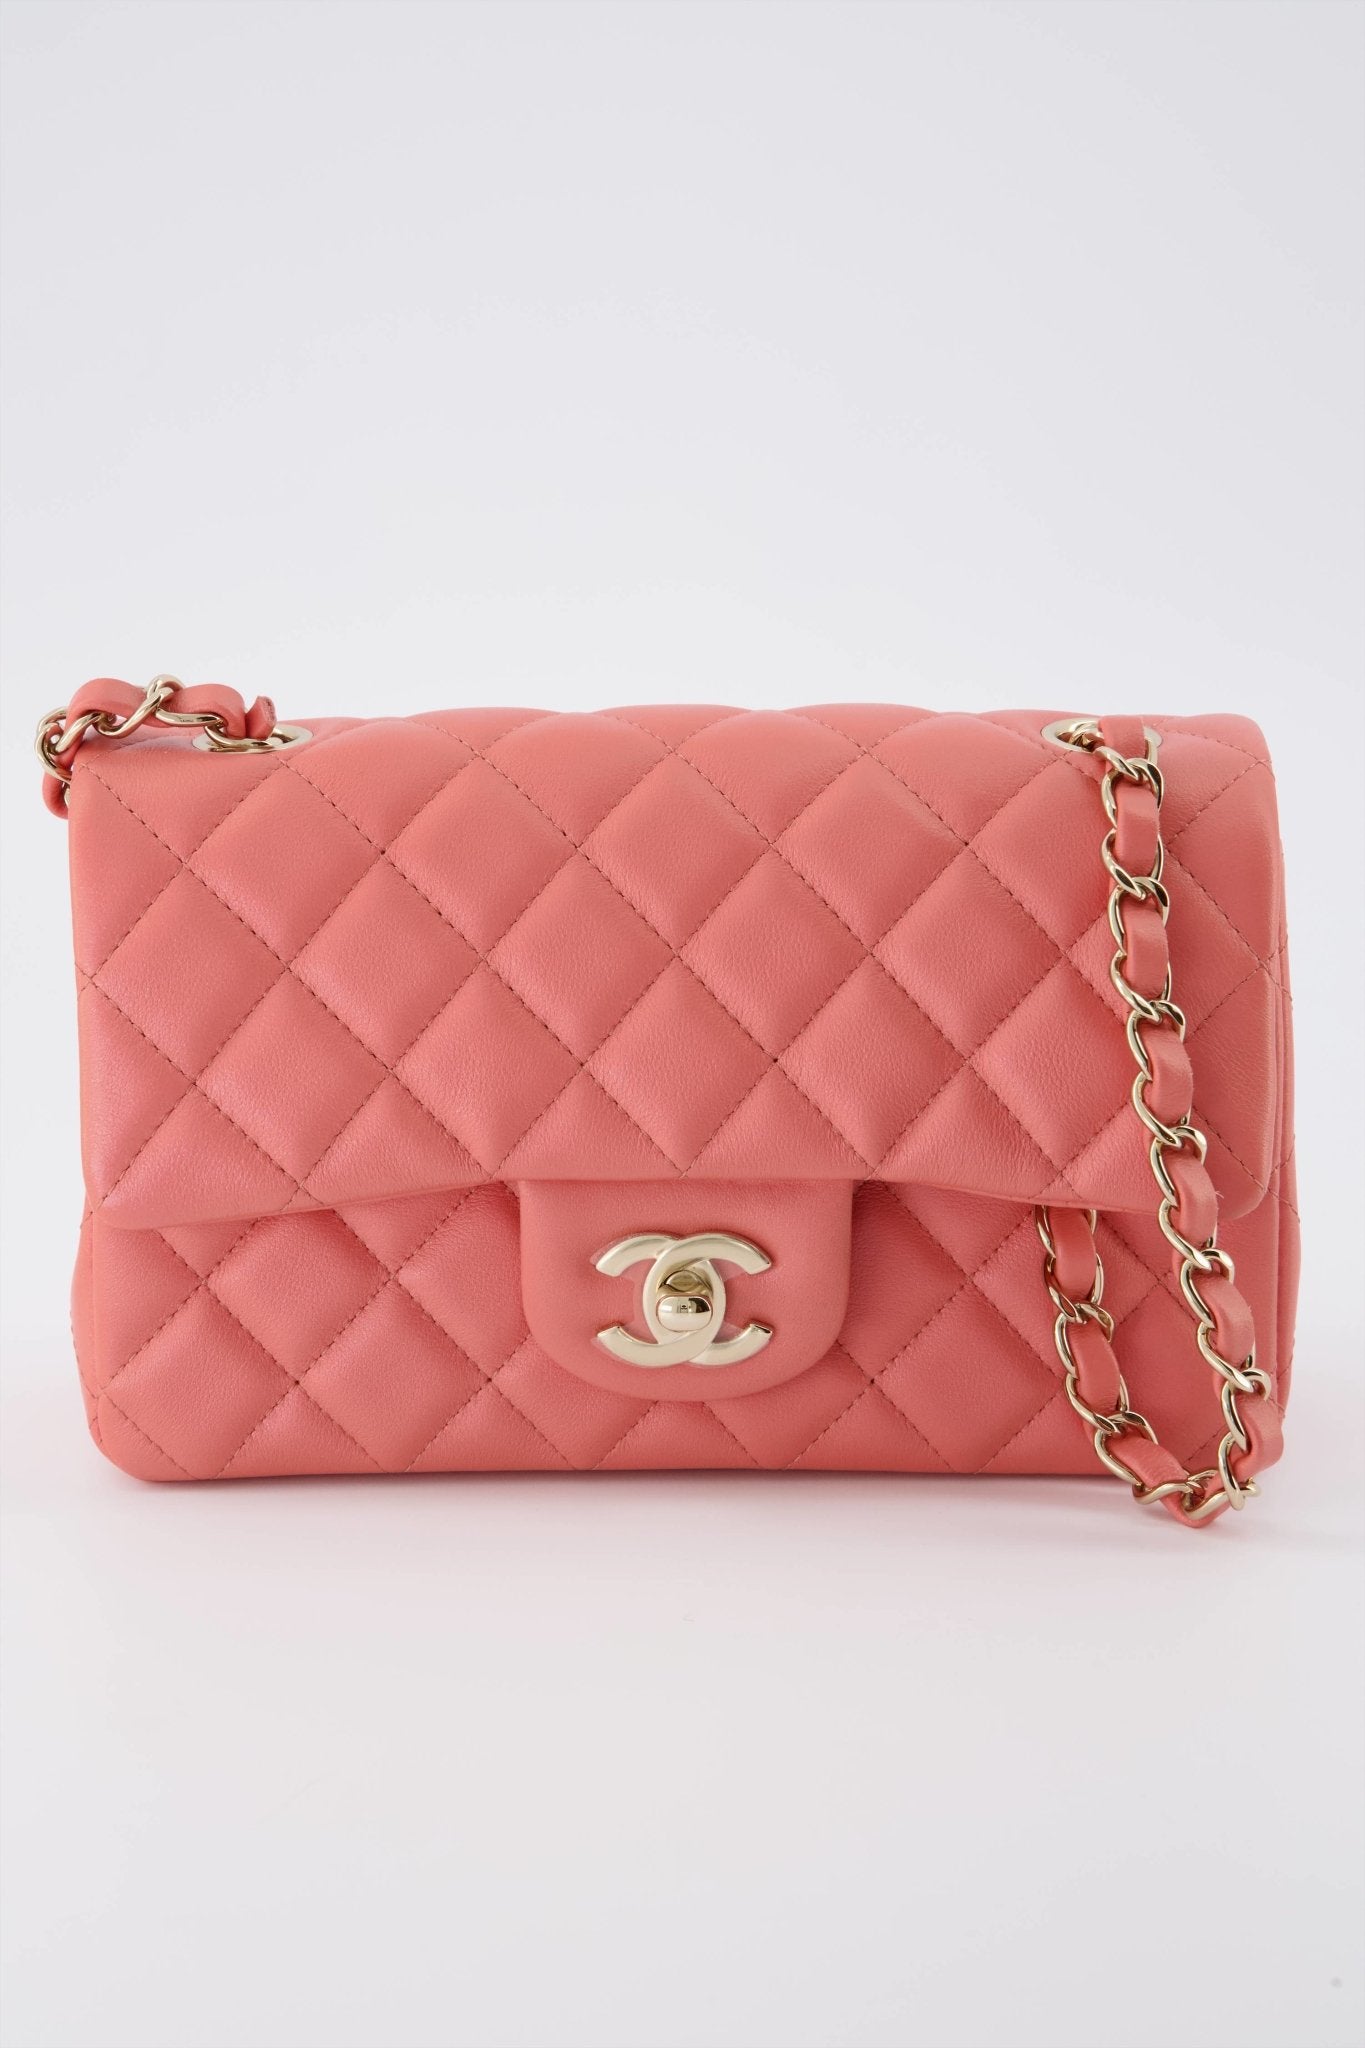 Chanel Mini Rectangular Flap Bag Pink Colour Lambskin with Champagne Gold Hardware